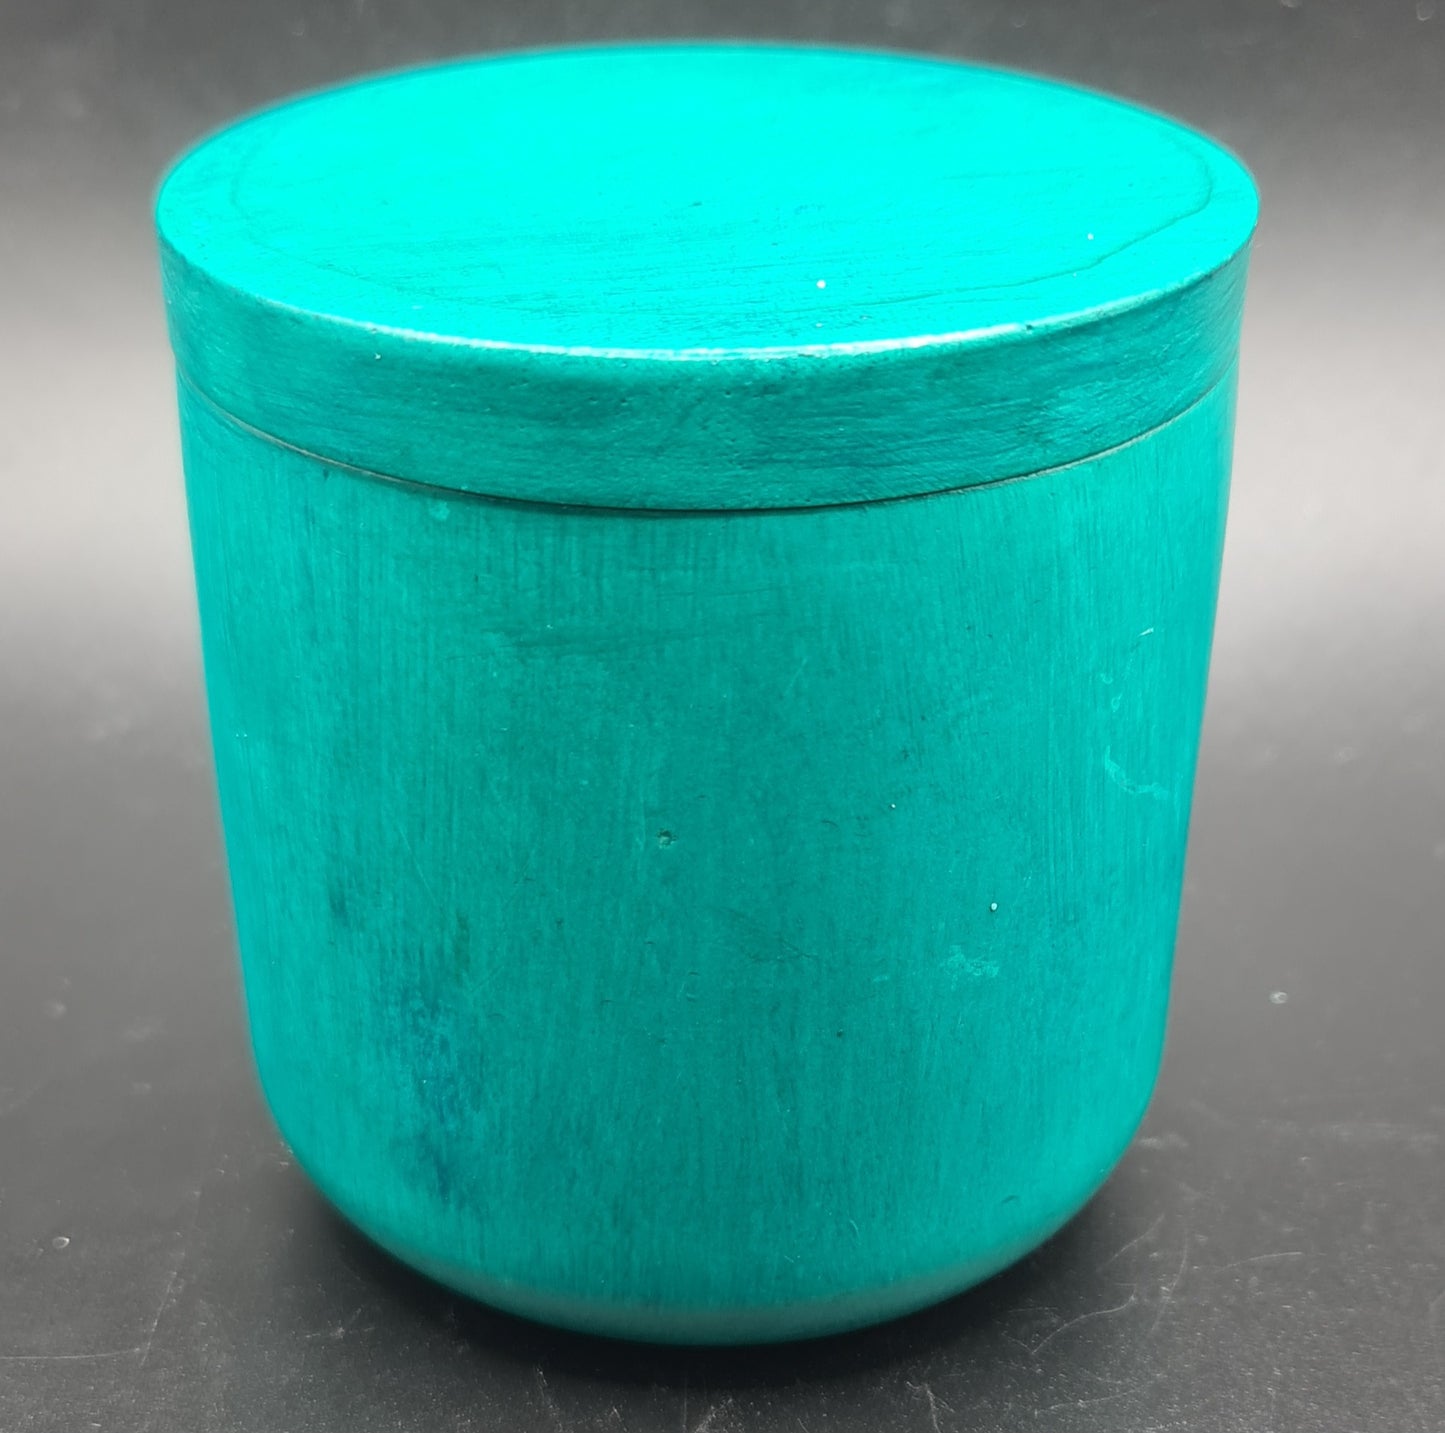 Minimalist simple-pot candle, perfect for understated elegance in any setting